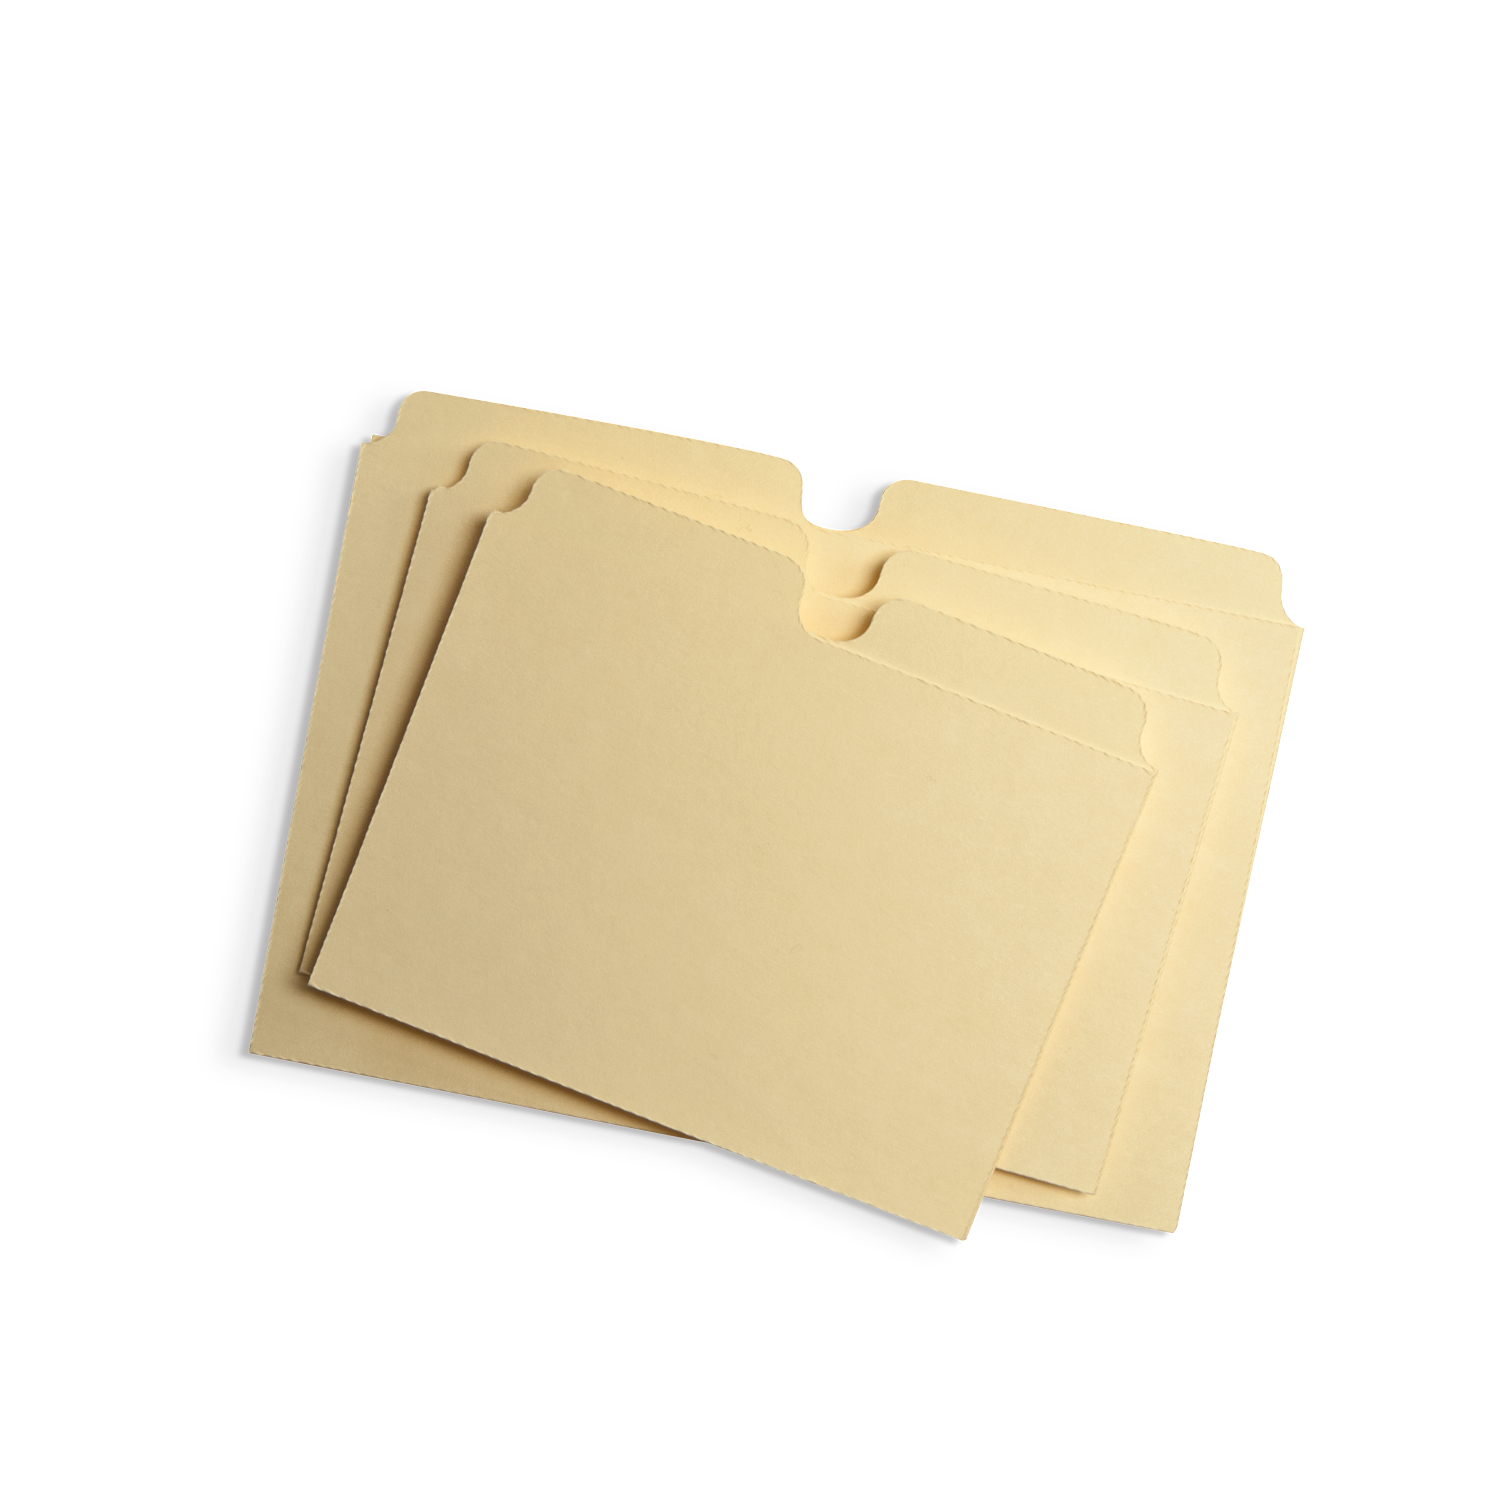  100 SUPER THICK index cards / 5x8 / 17pt (0.017) 130lb /  blank un-ruled/archival acid-free : Office Products